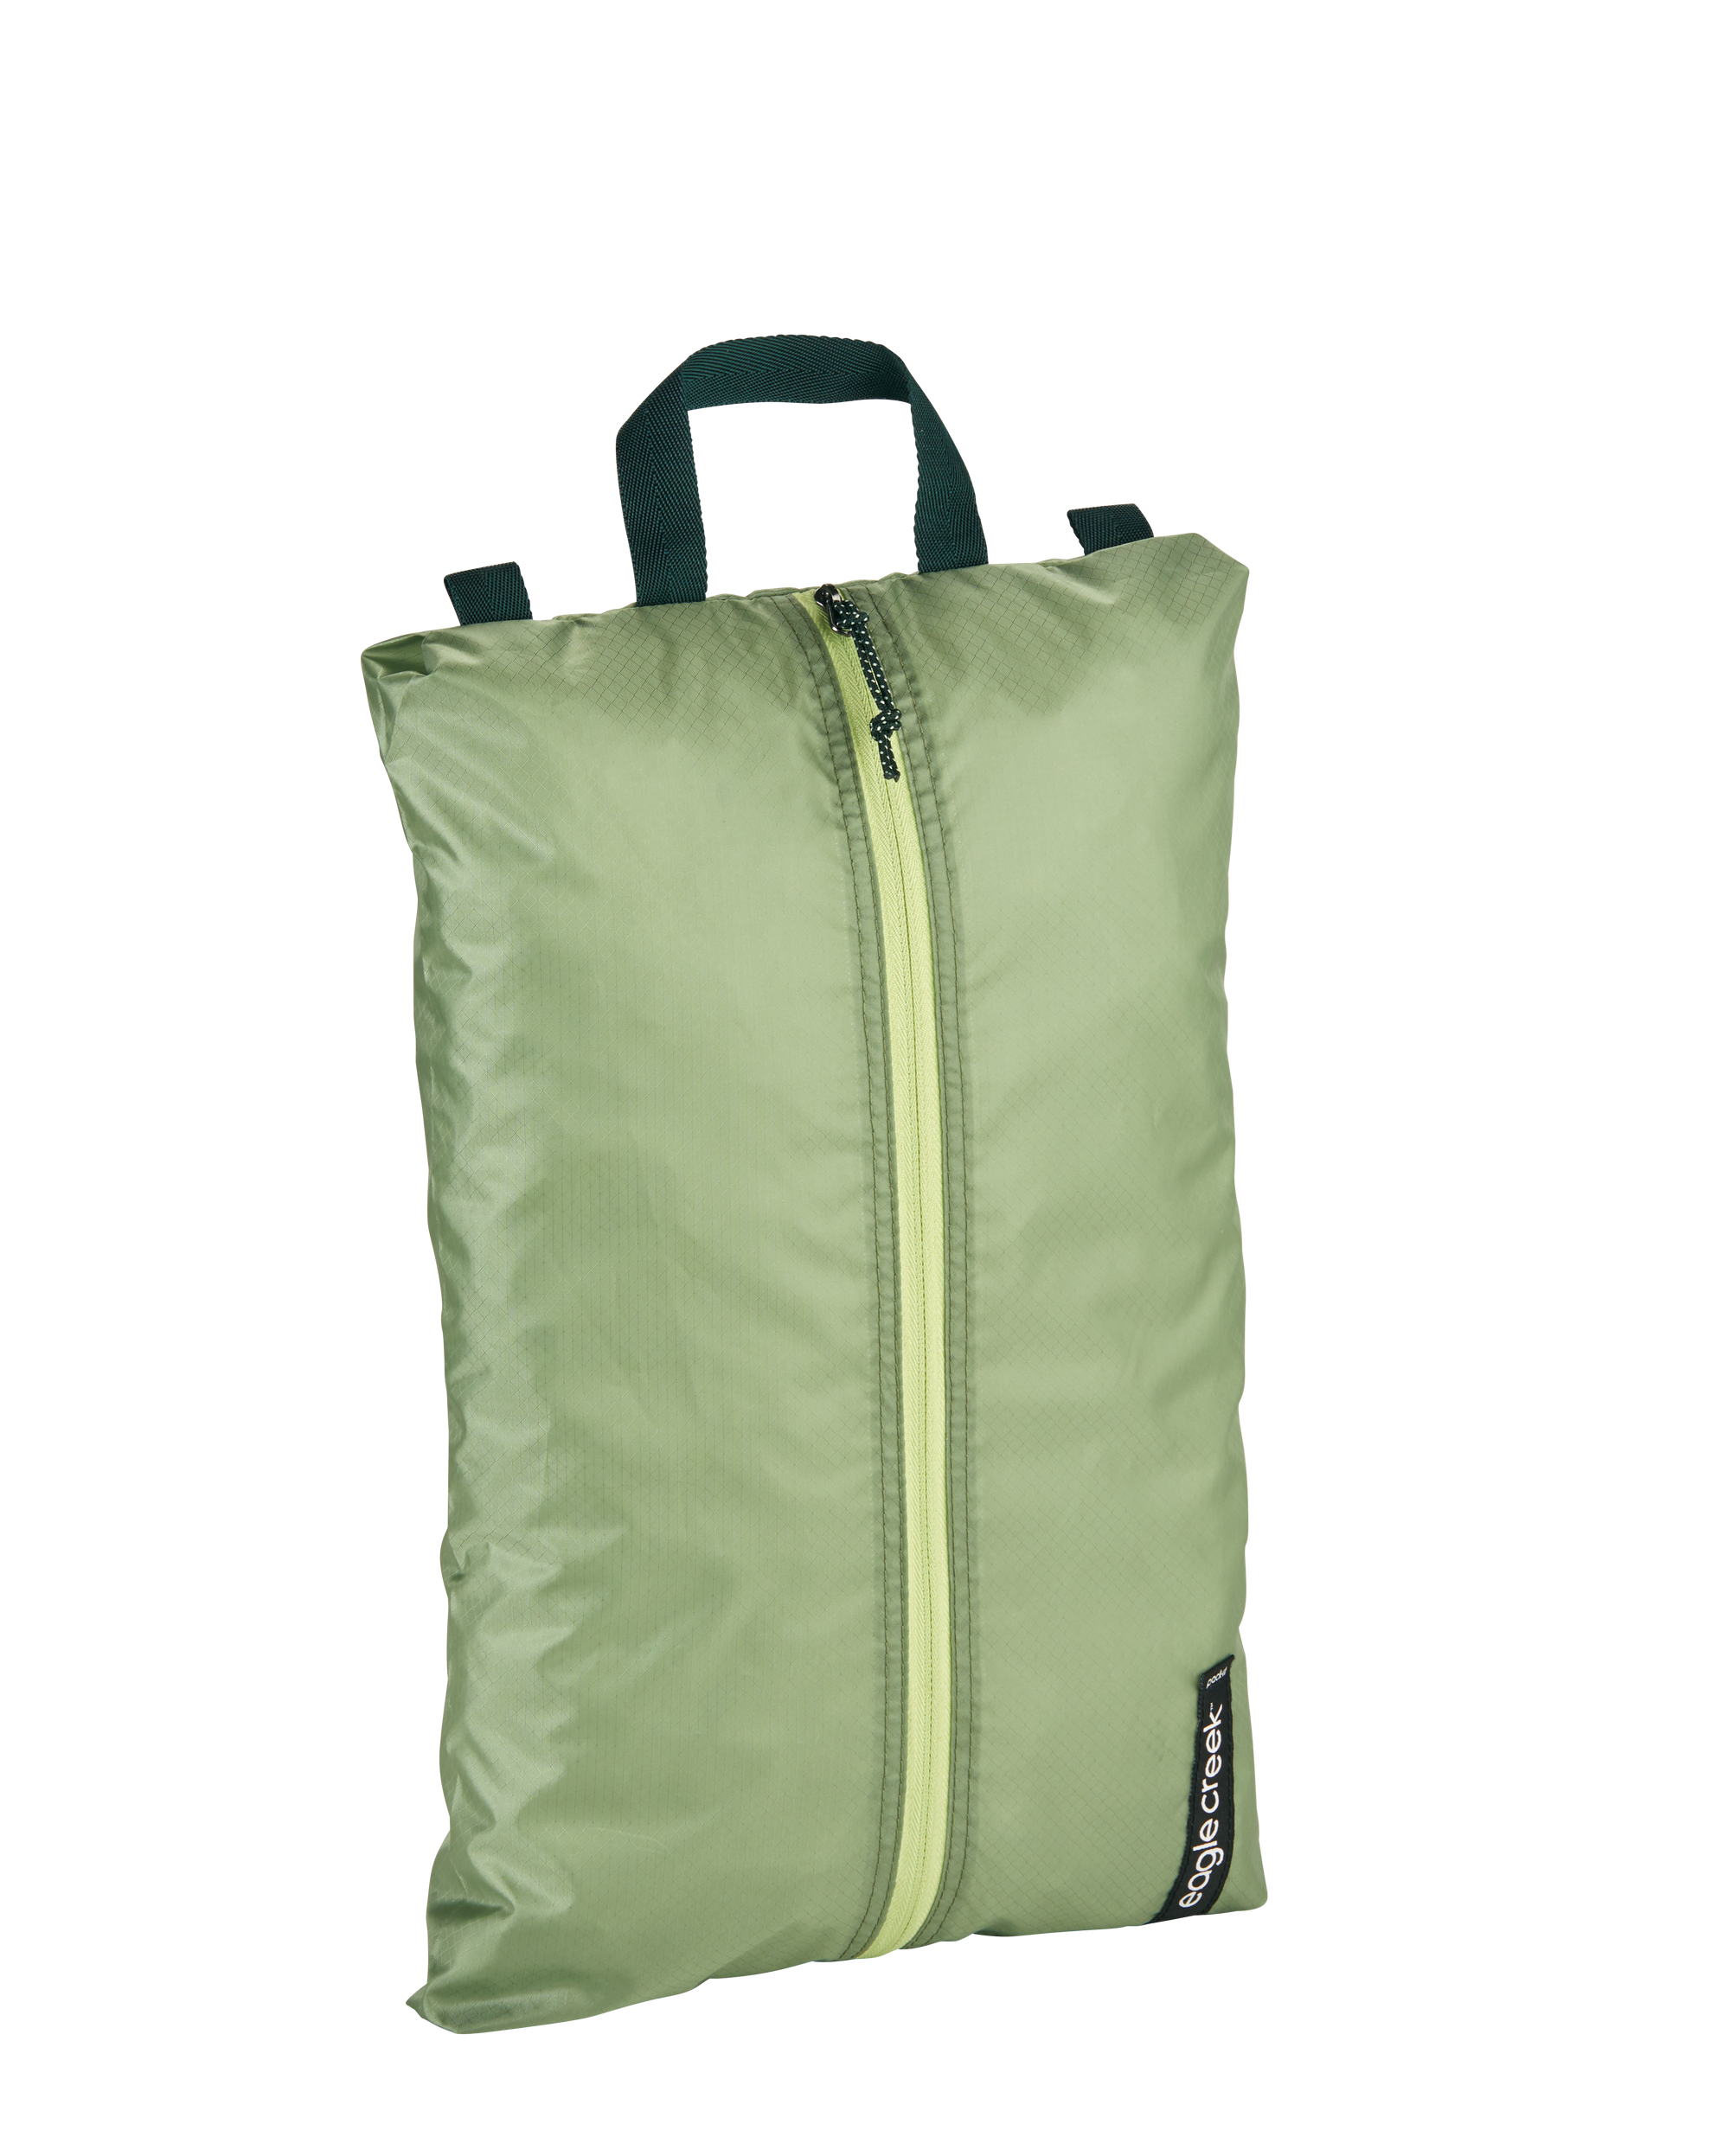 PACK-IT ISOLATE SHOE SAC - MOSSY GREEN